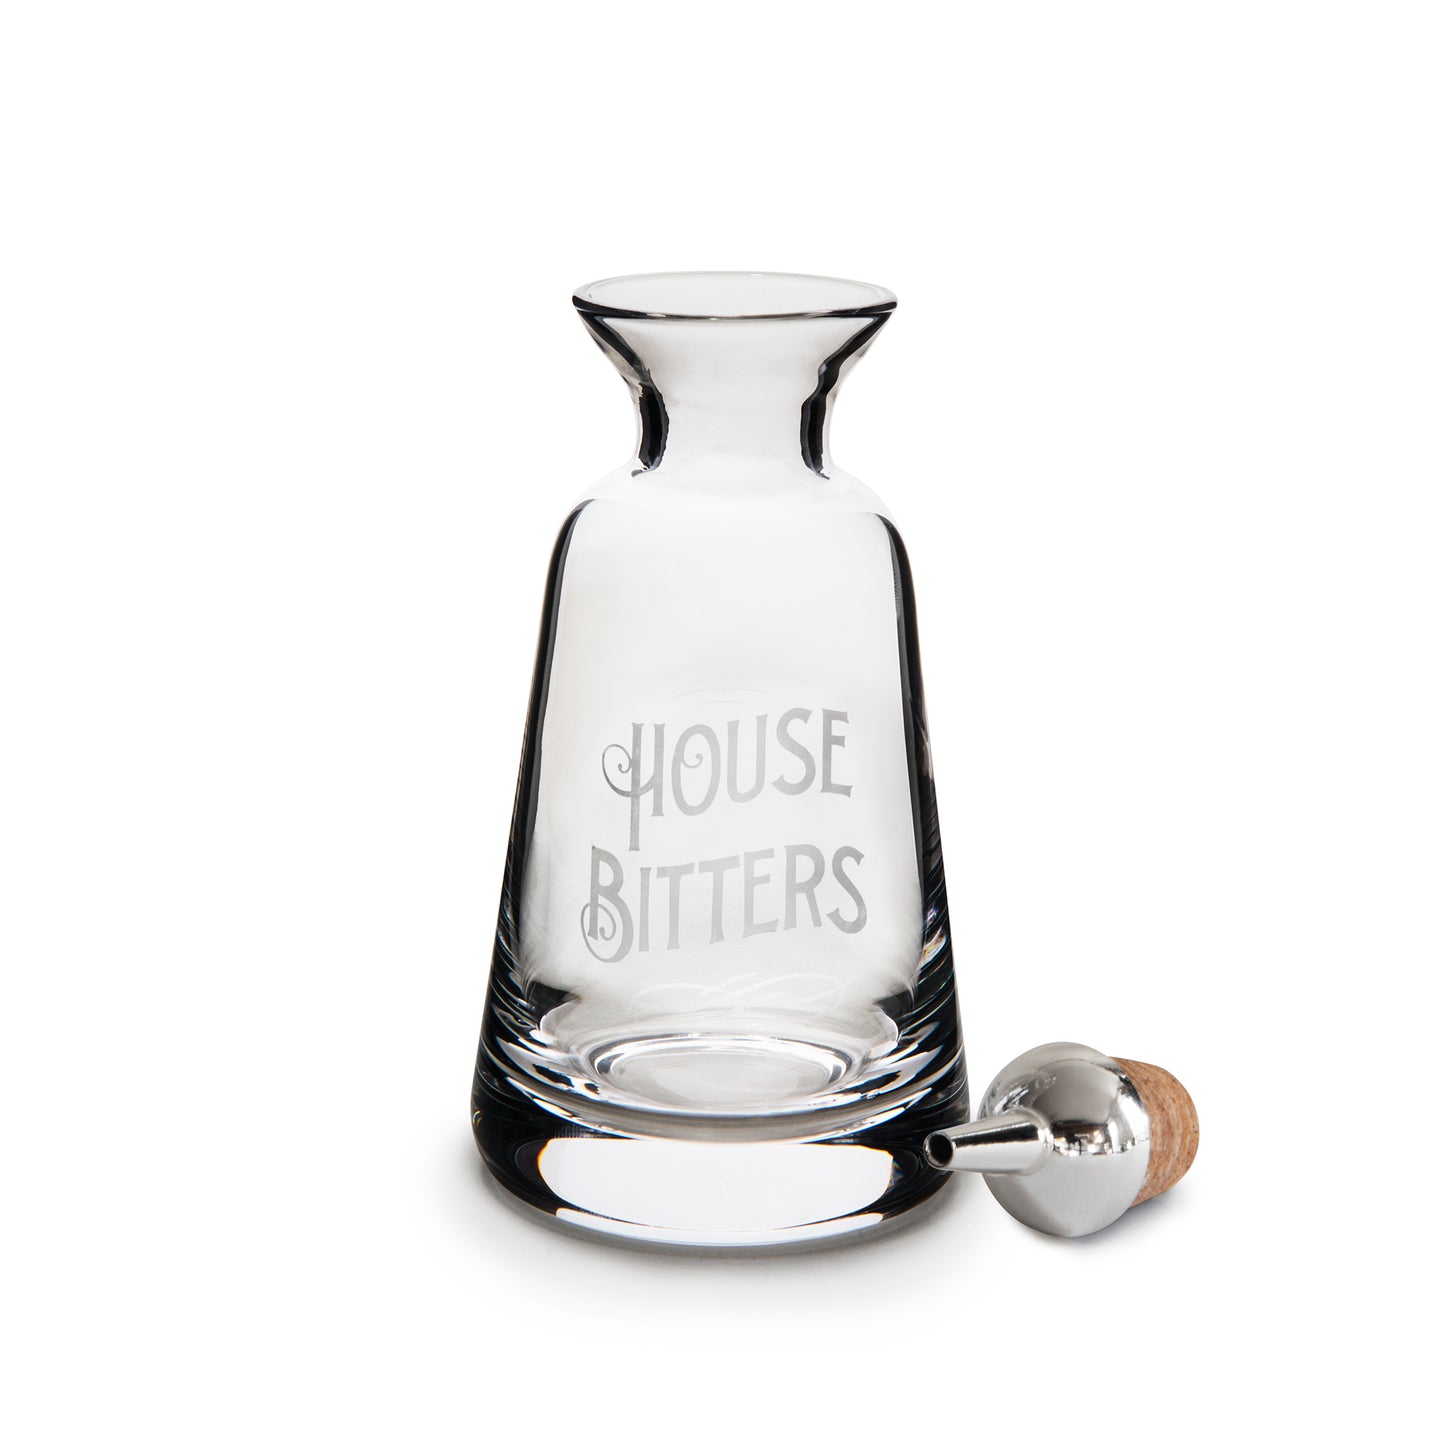 FINEWELL™ BITTERS BOTTLES ENGRAVERS STYLE HOUSE BITTERS – SILVER-PLATED DASHER TOP / 3oz (90ml)